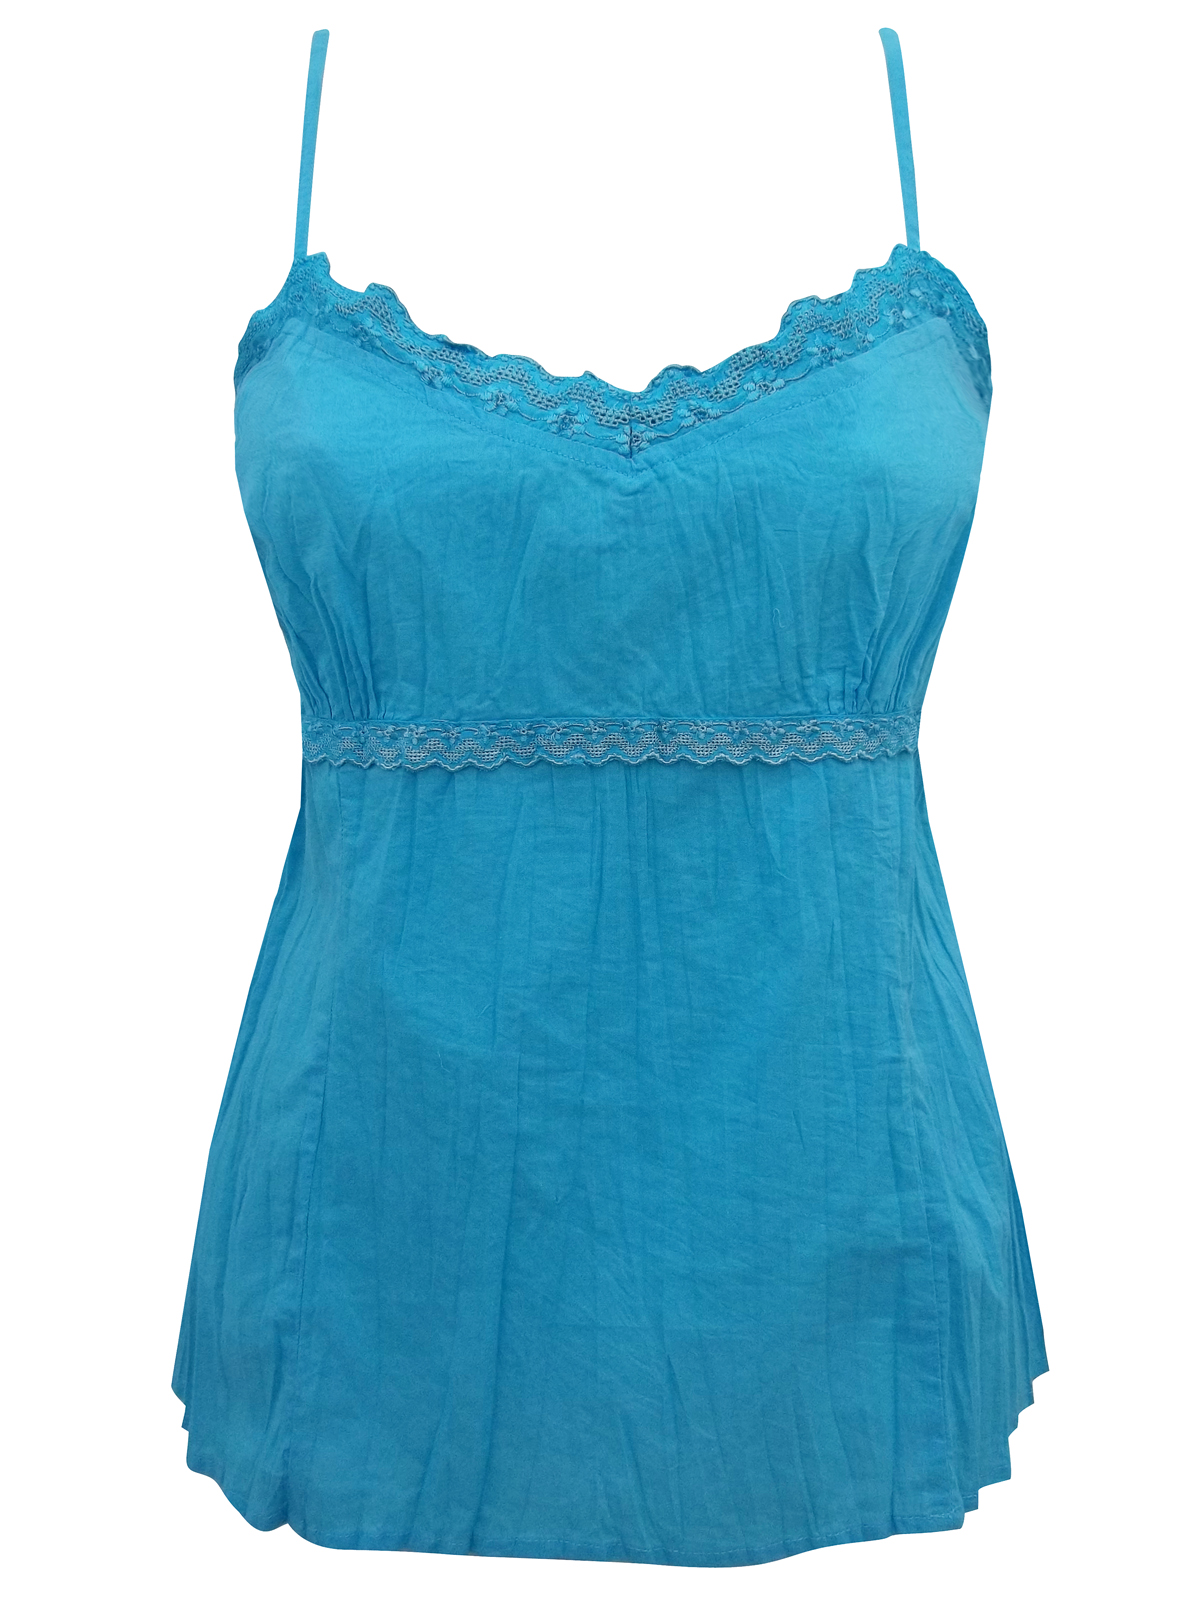 Marks and Spencer - - M&5 Turquoise Crinkle Cotton Lace Trimmed ...